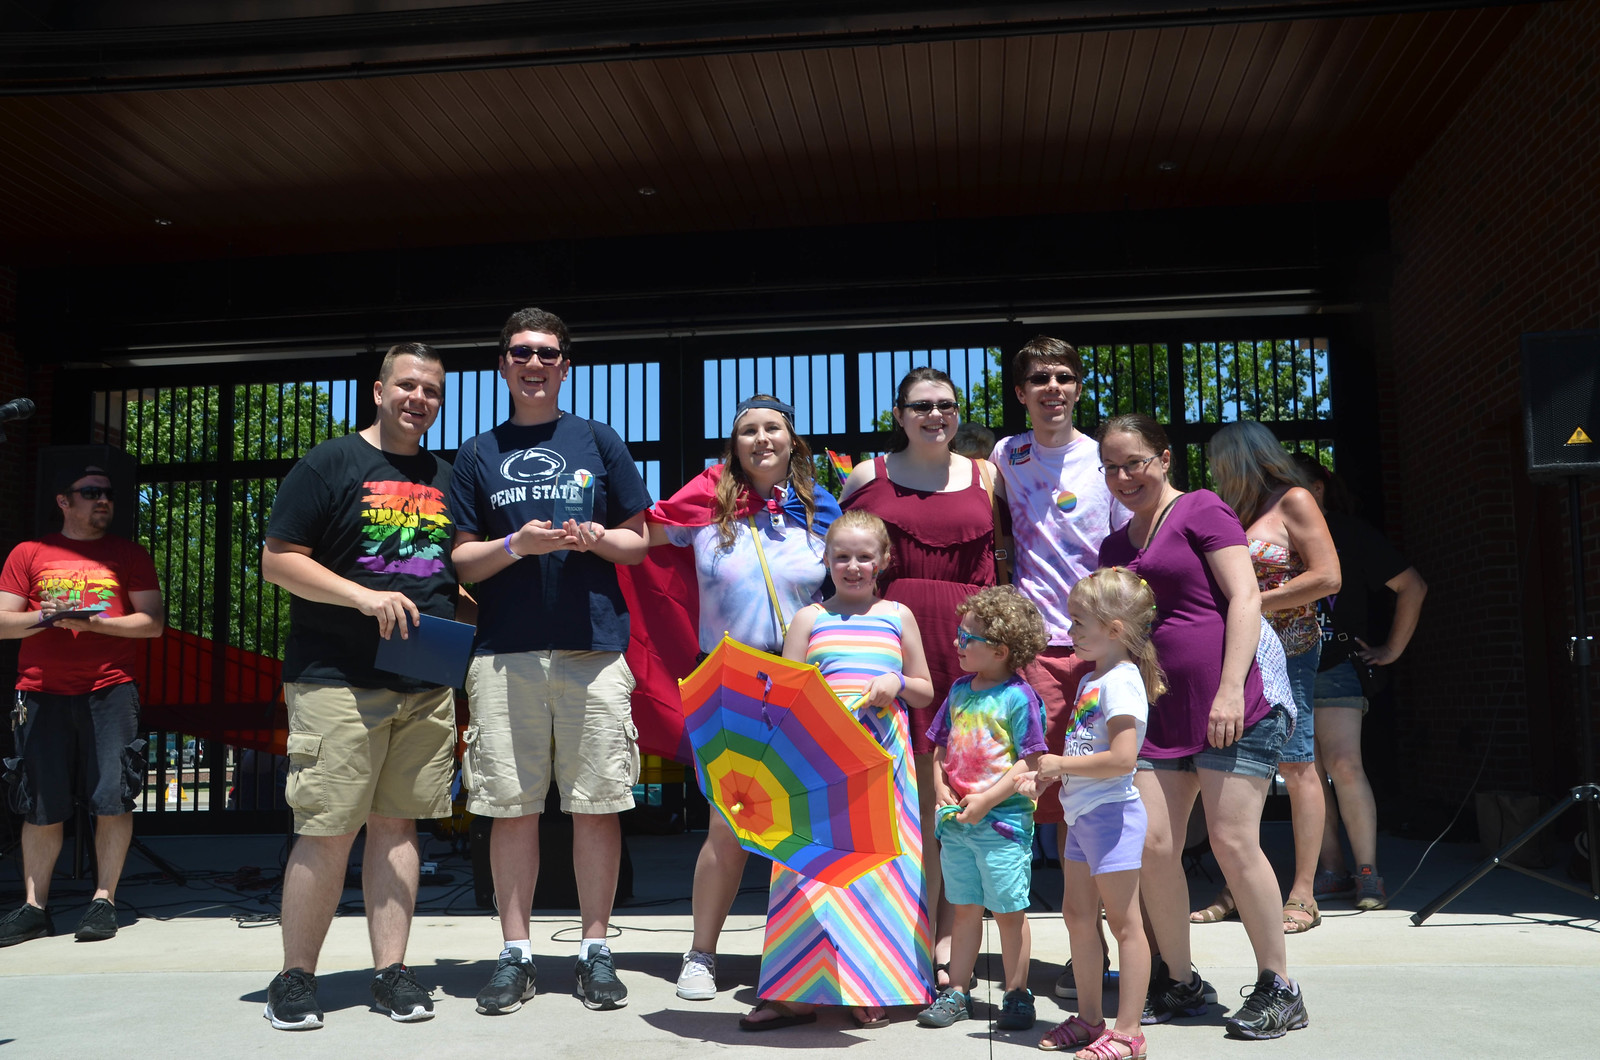 Alex with members of Trigon: Trigon – Founded around December of 1992, when Penn State Behrend’s student government unanimously approved making this an official student organization, this group has hosted many events, including regional Gay Straight Allia